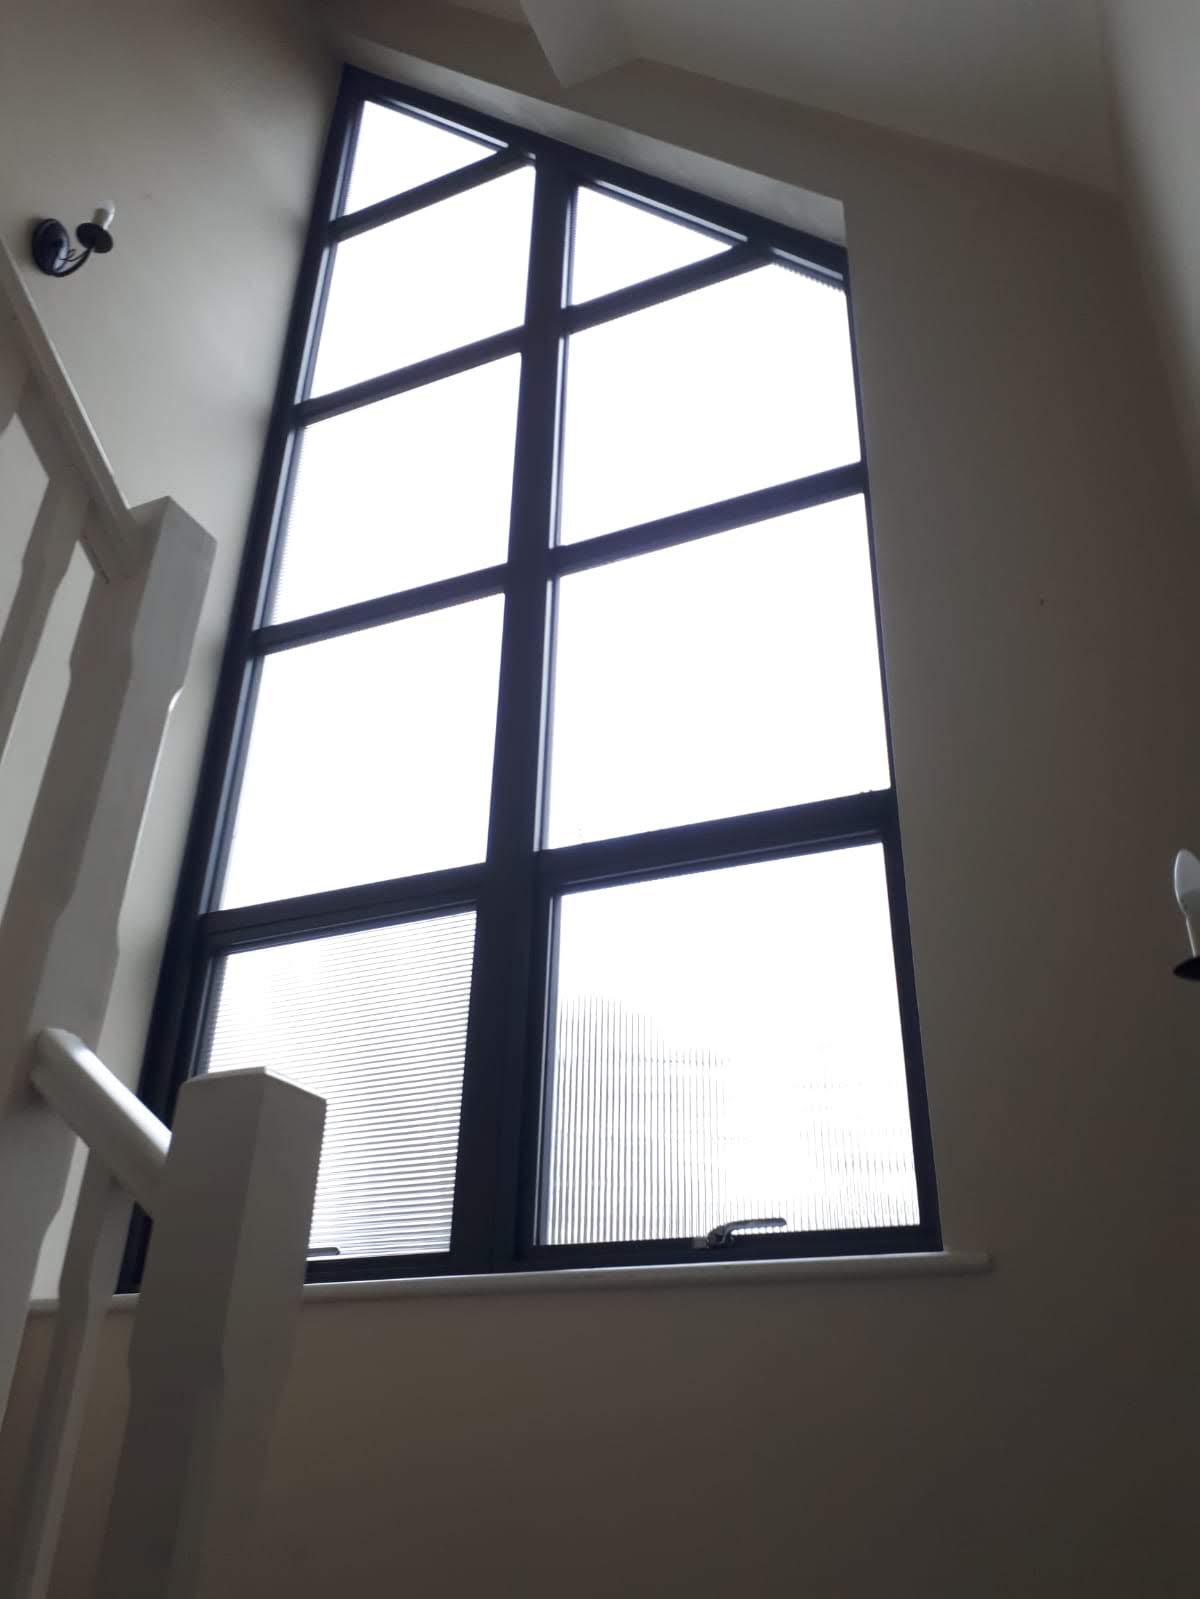 Inside view of a new shaped window installation.